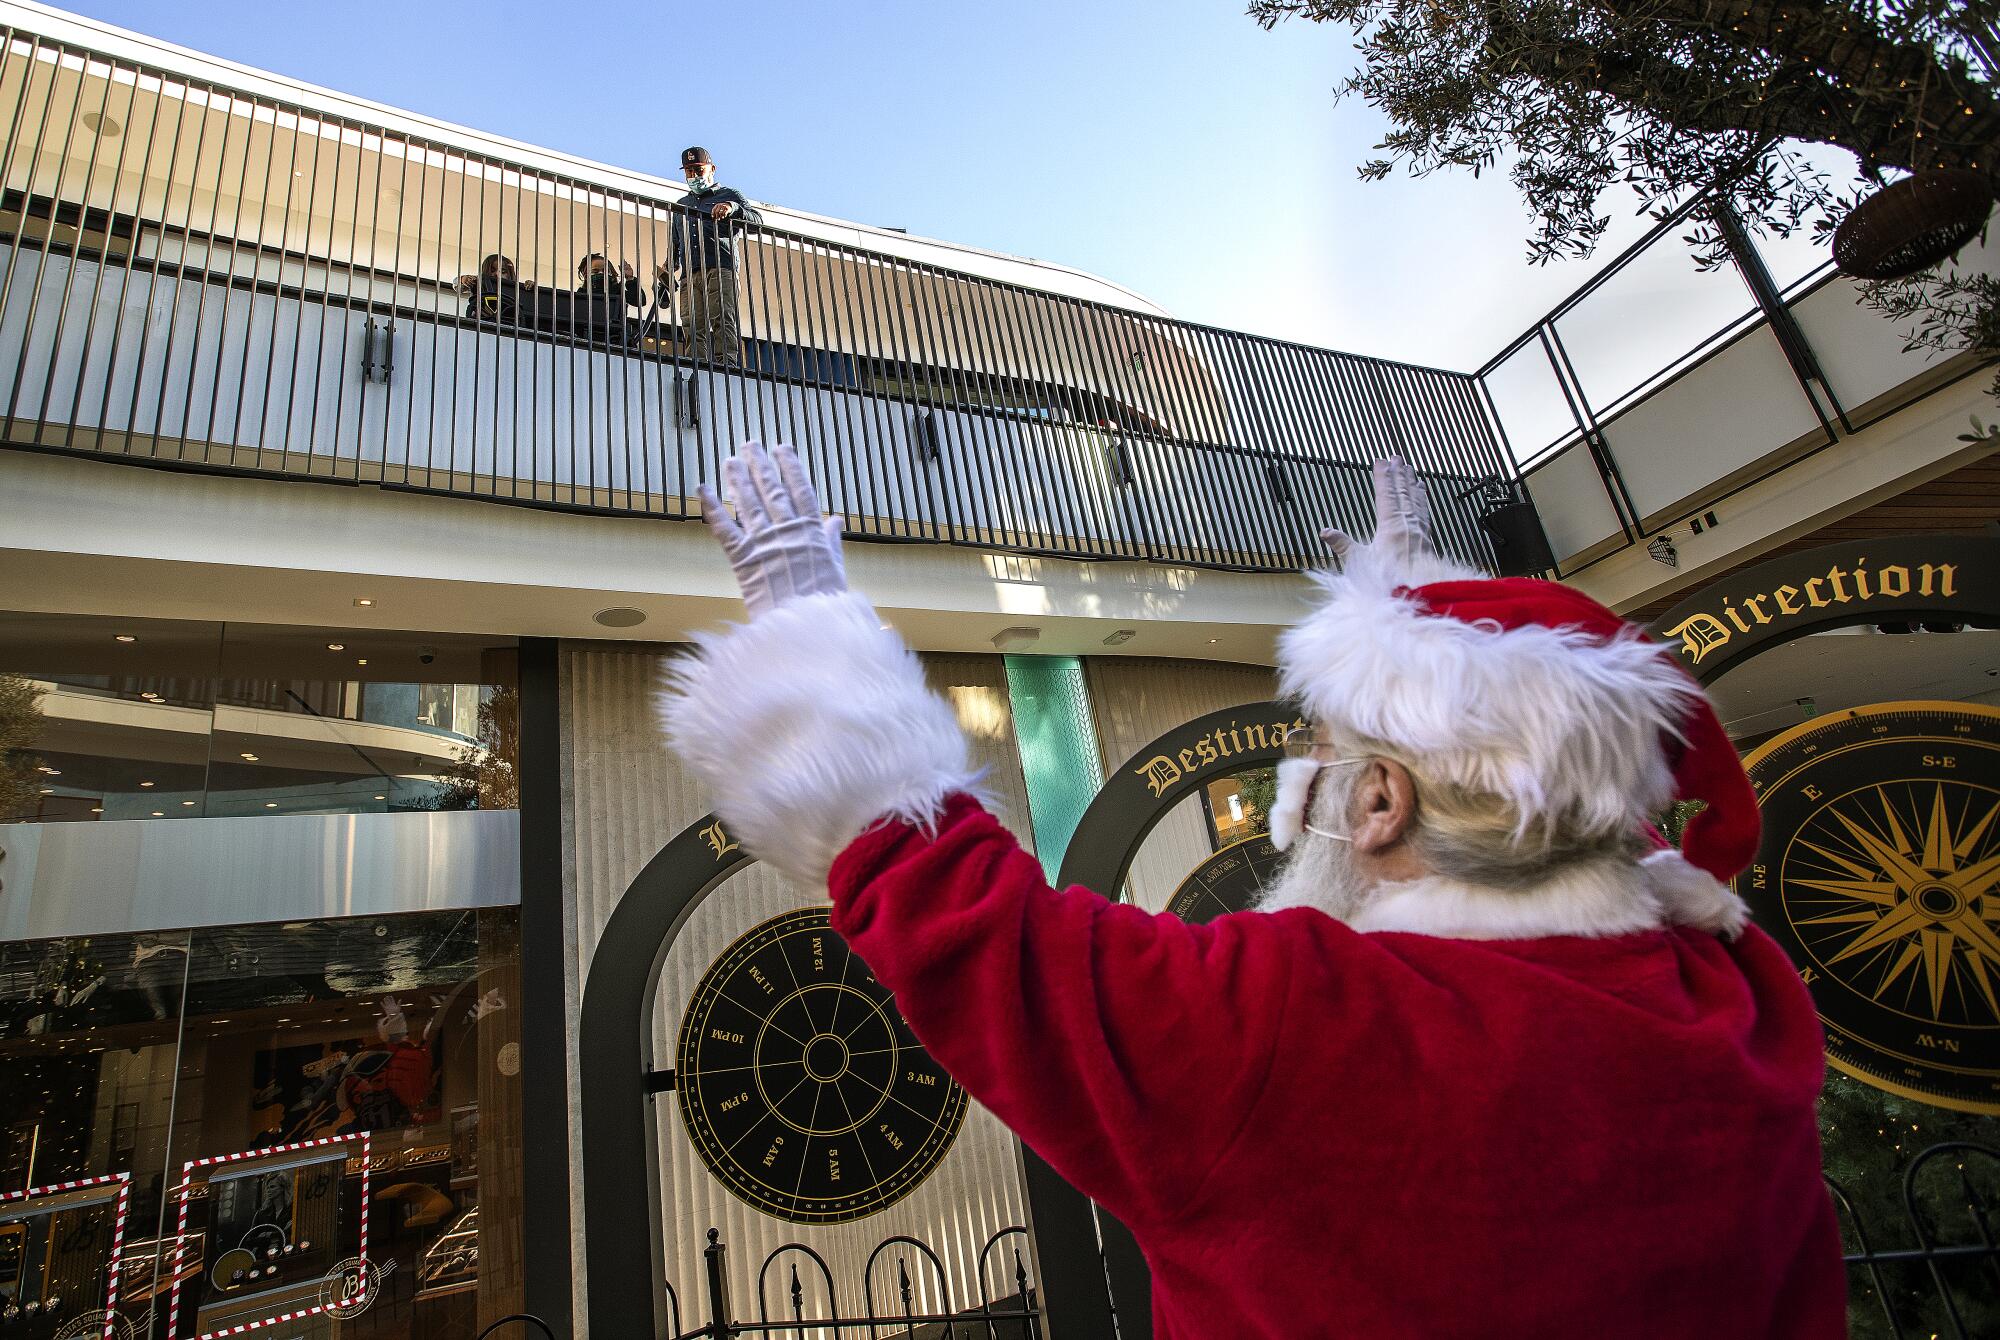 Larry Buckelew, dressed up as Santa Claus, greets visitors to the Westfield Century City shopping mall.